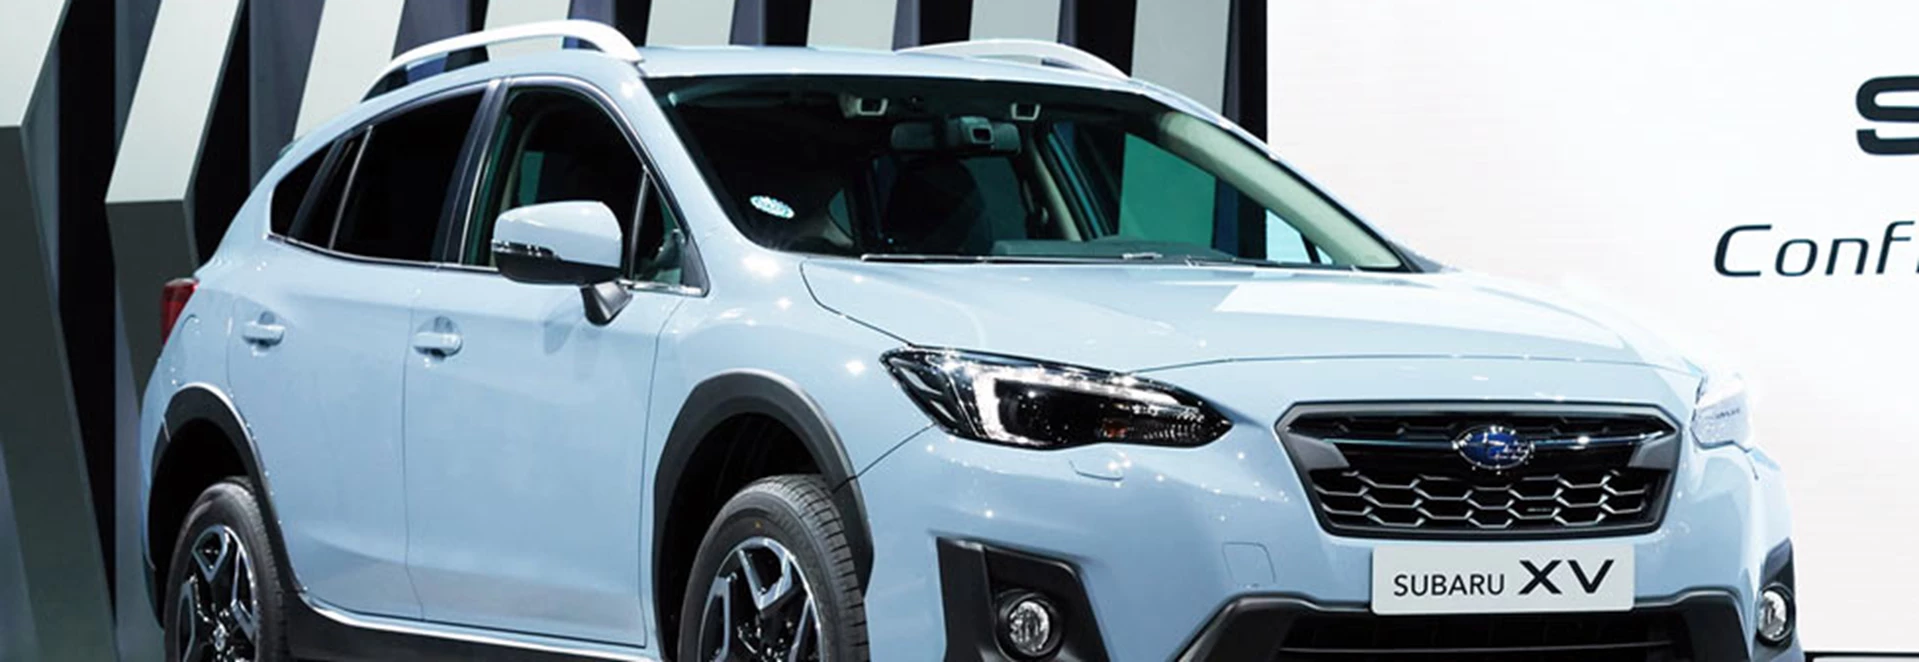 What to expect from the new 2018 Subaru XV